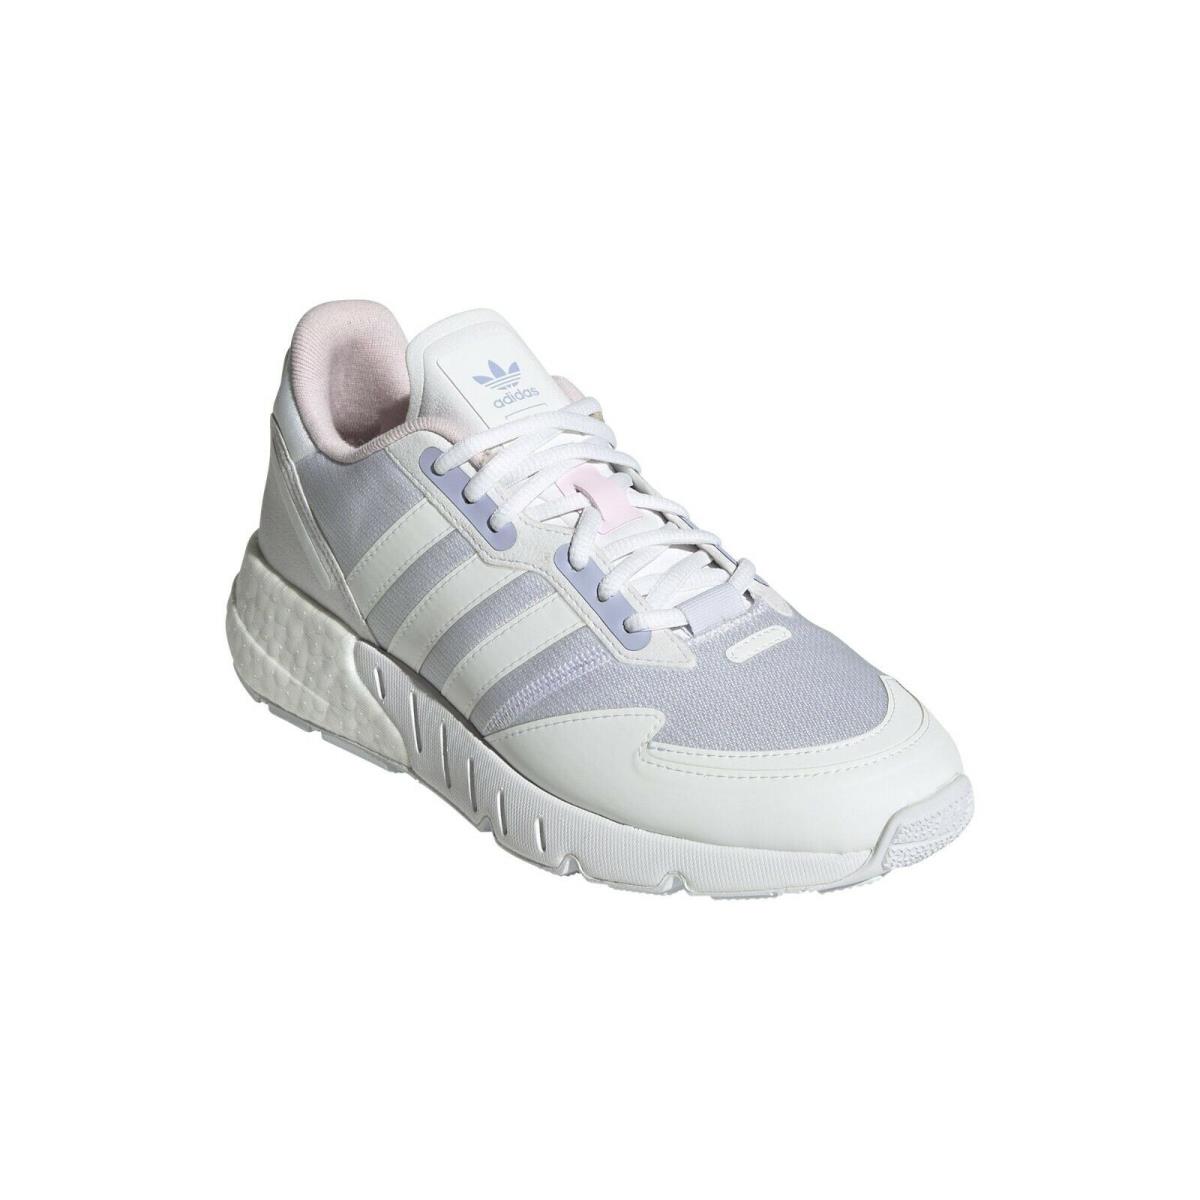 Adidas ZX 1K Boost Core White/pink Rose Mesh Lifestyle Shoes Sneakers For Women